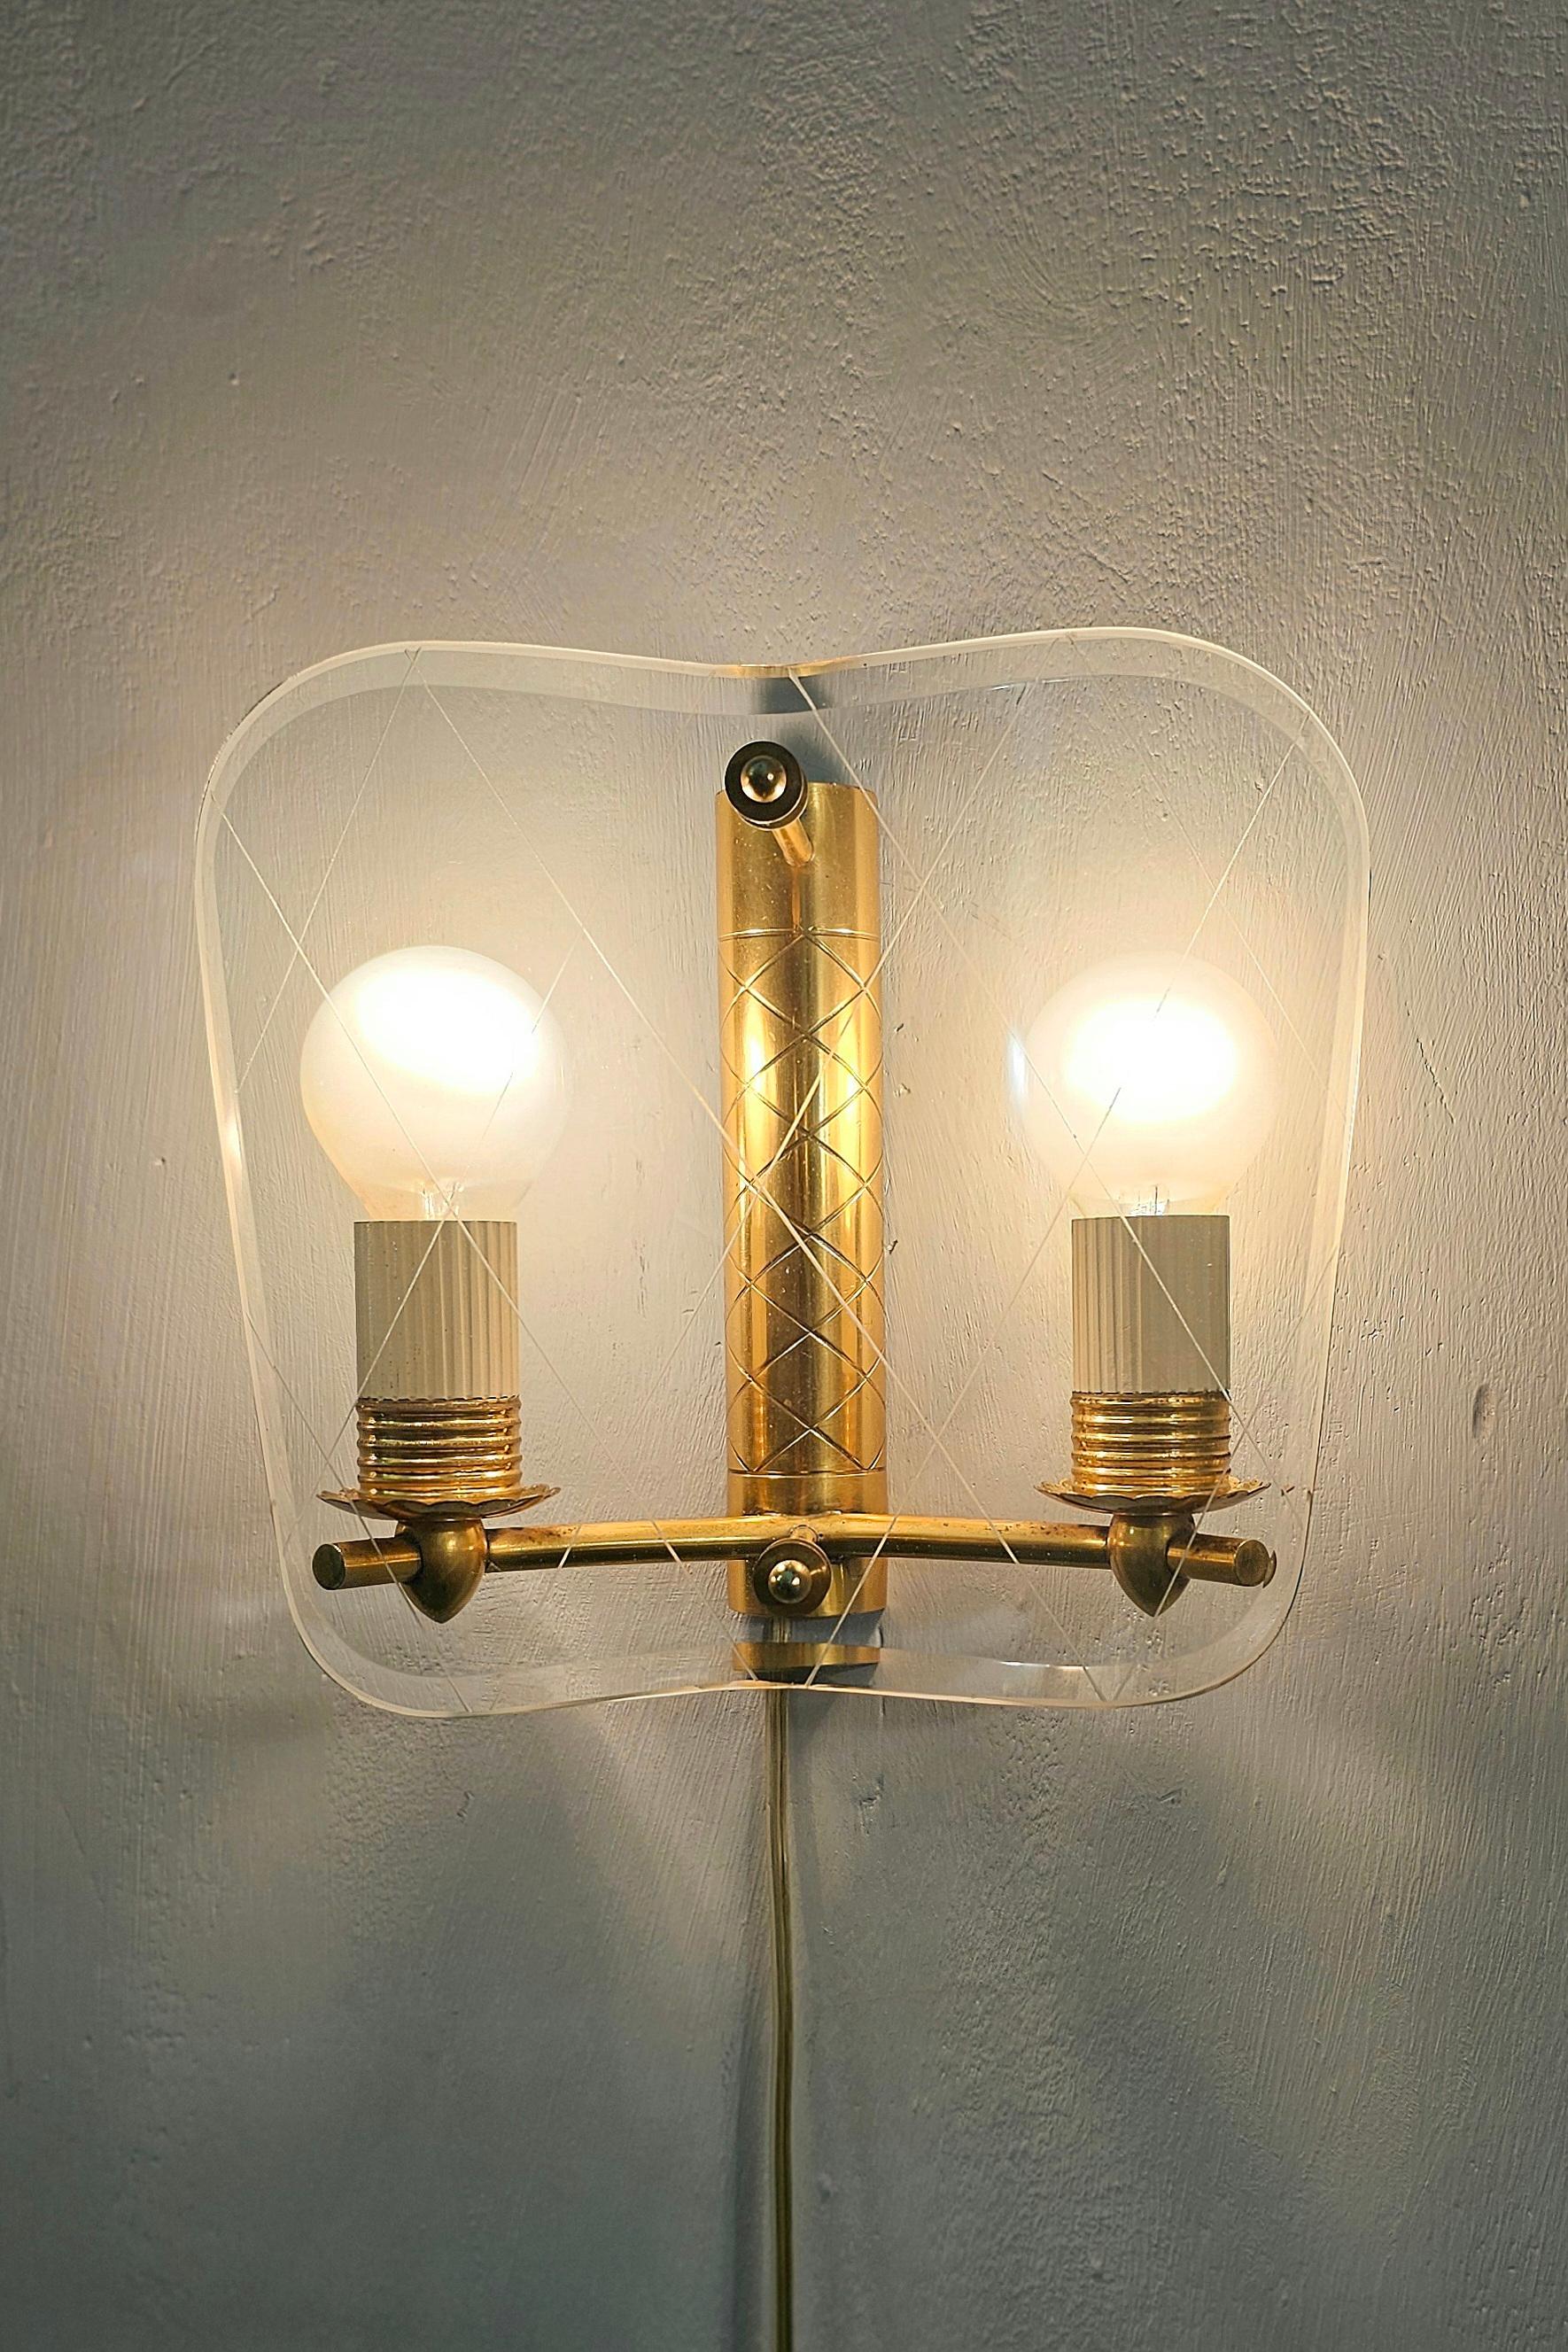 3 Wall Lights Sconces Brass Decorated Glass Midcentury Italian Design 1950 For Sale 5